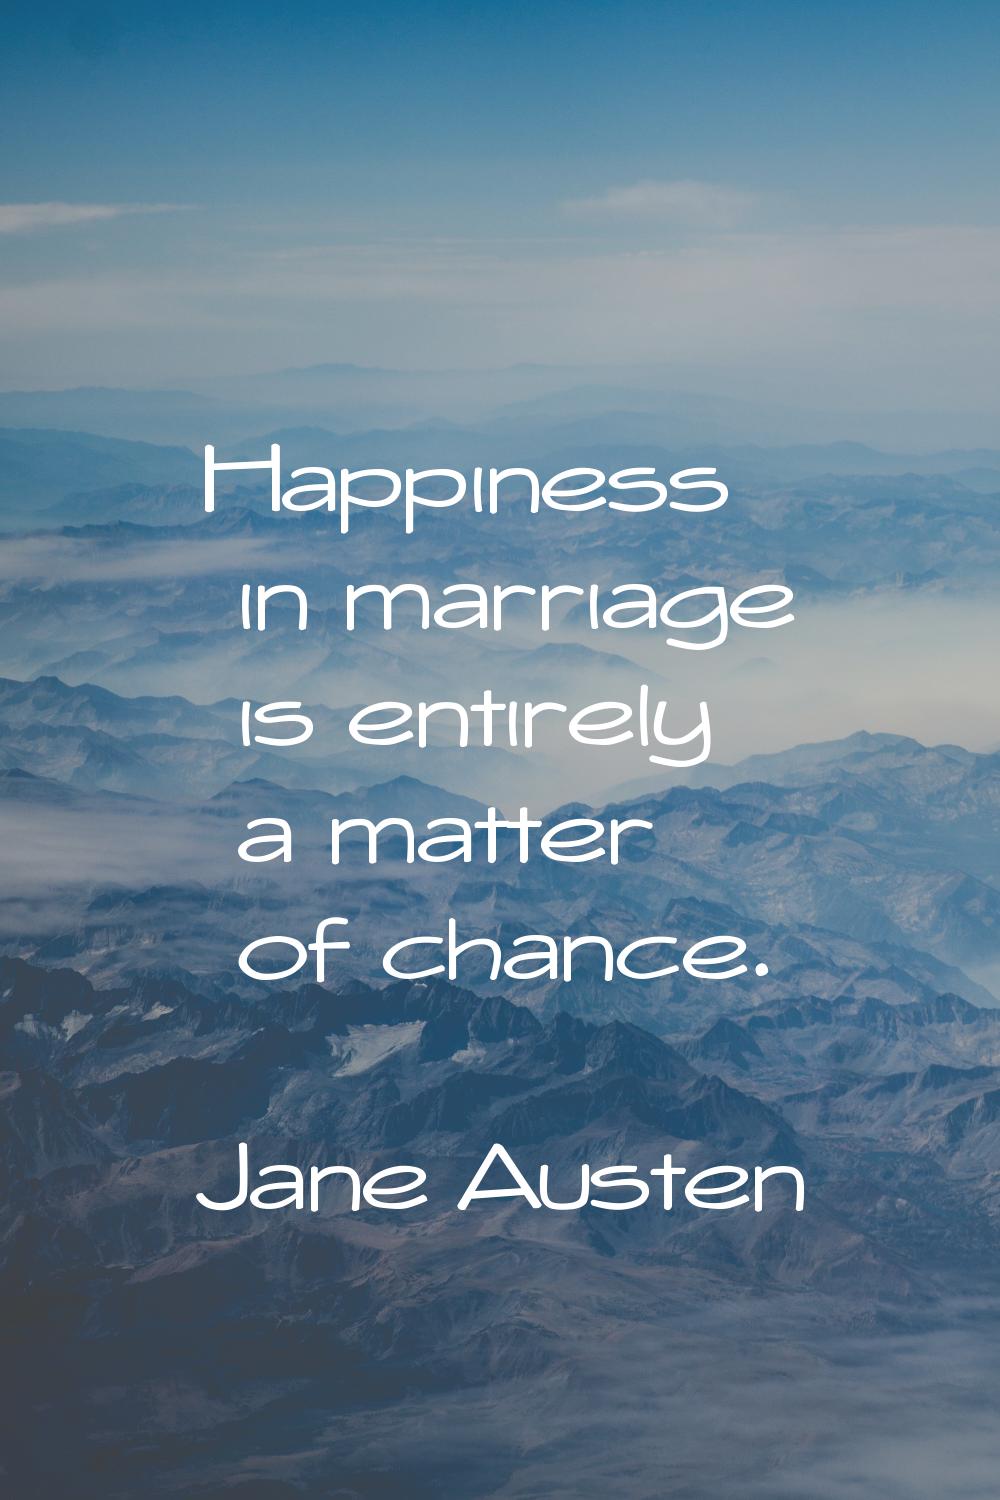 Happiness in marriage is entirely a matter of chance.